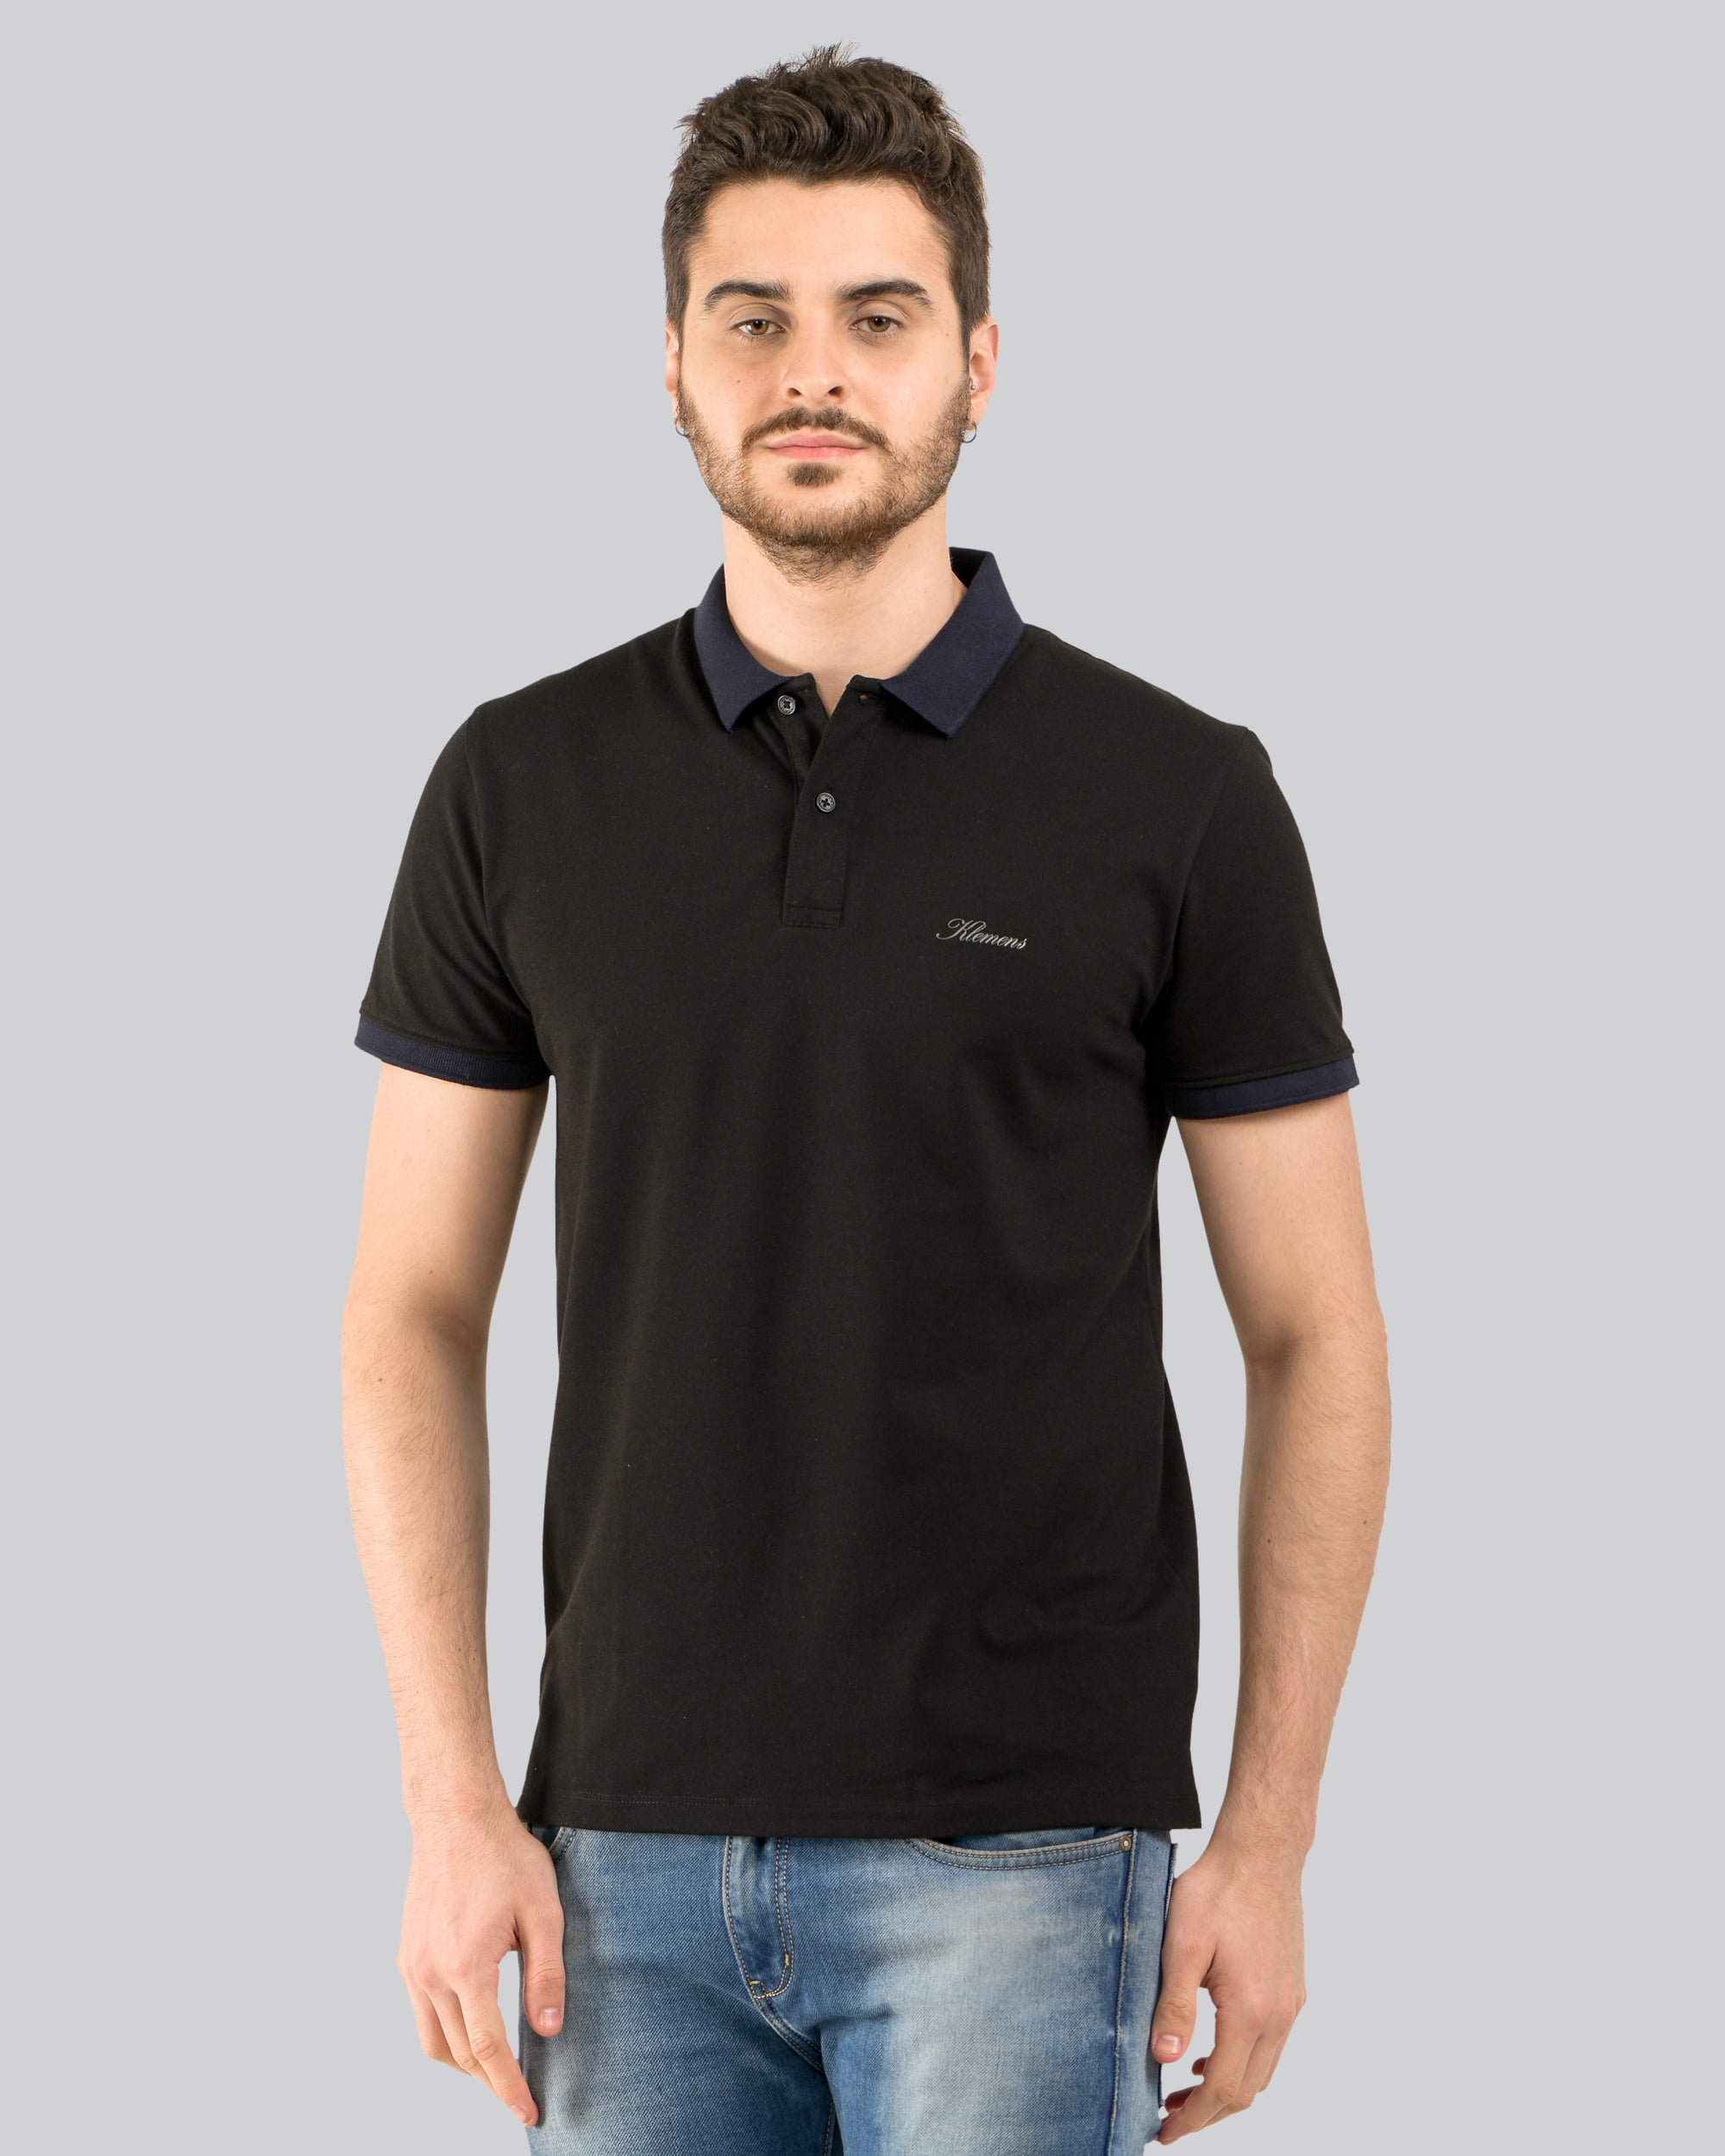 Classic Polo - Klemens